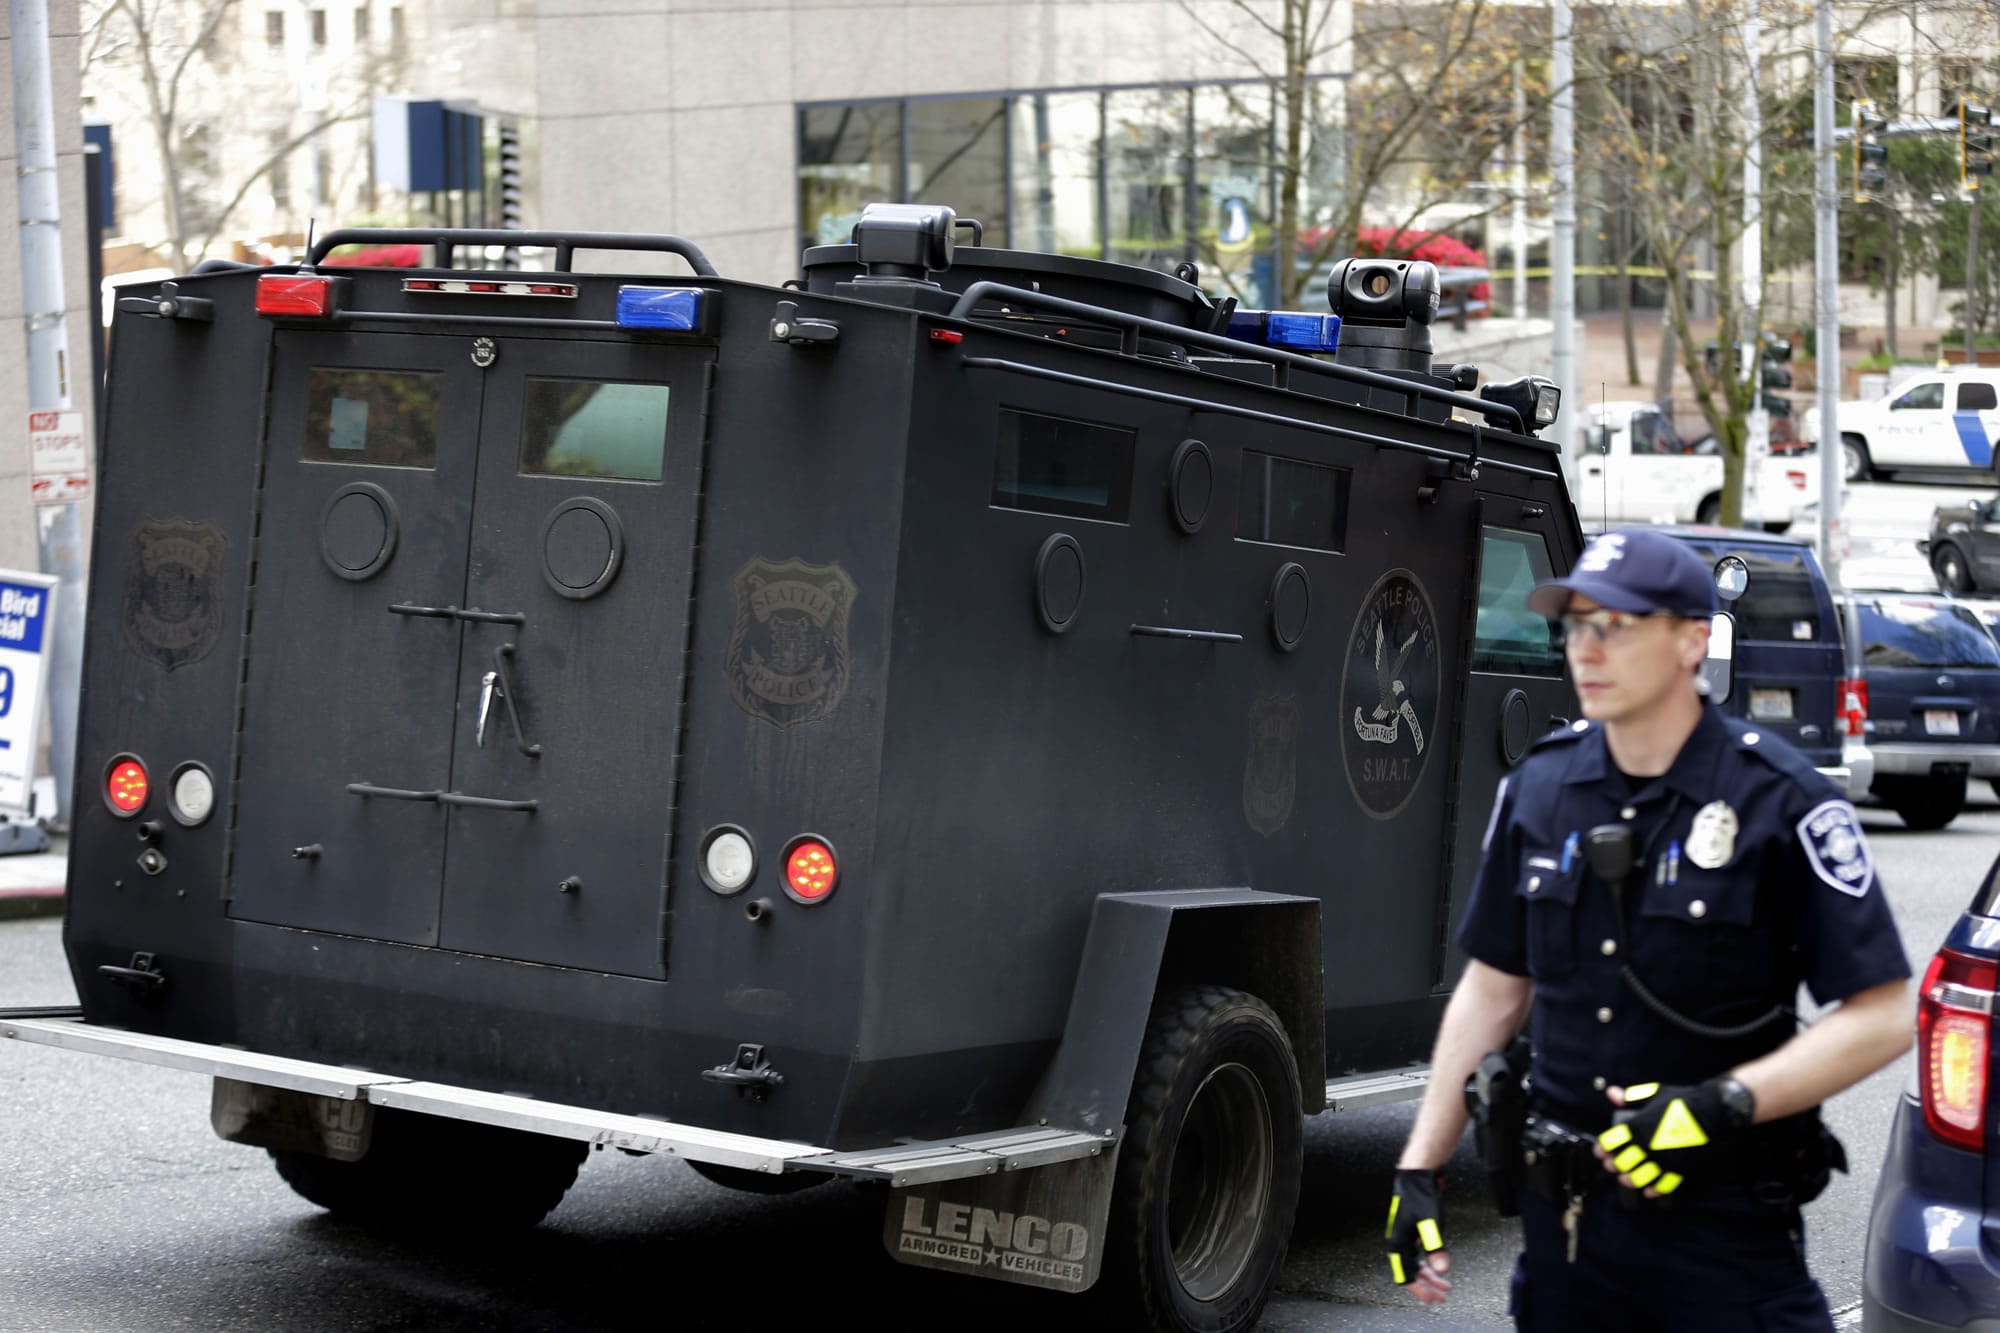 A Seattle Police SWAT vehicle drives near the scene of a shooting involving several police officers in downtown Seattle, Thursday, April 20, 2017. (AP Photo/Ted S.